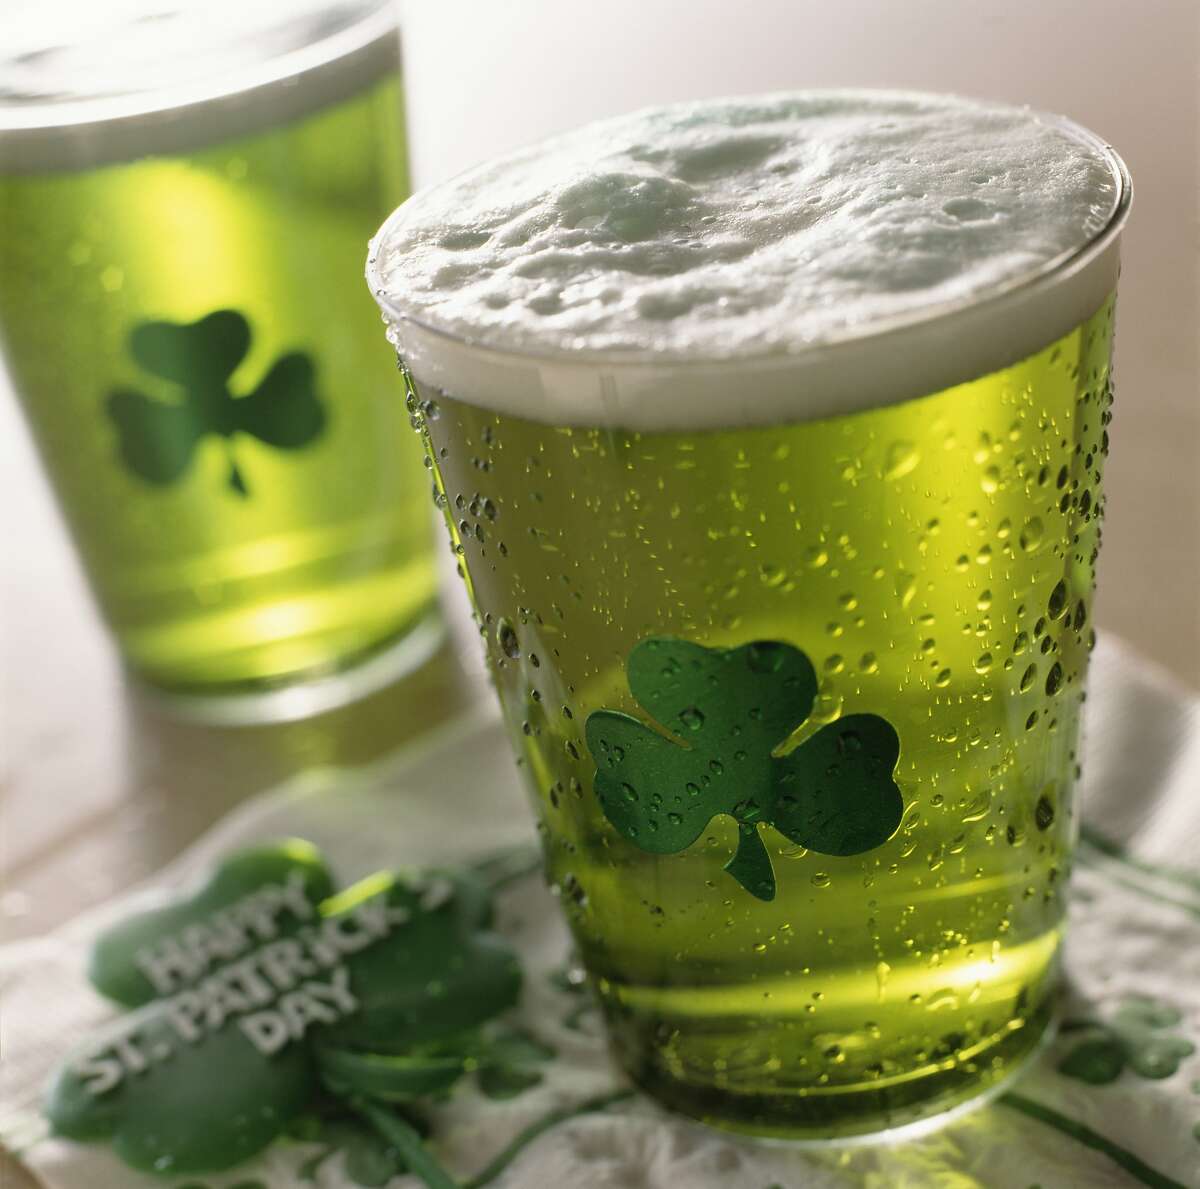 Why do we celebrate St. Patrick's Day in such a specifically tacky way?